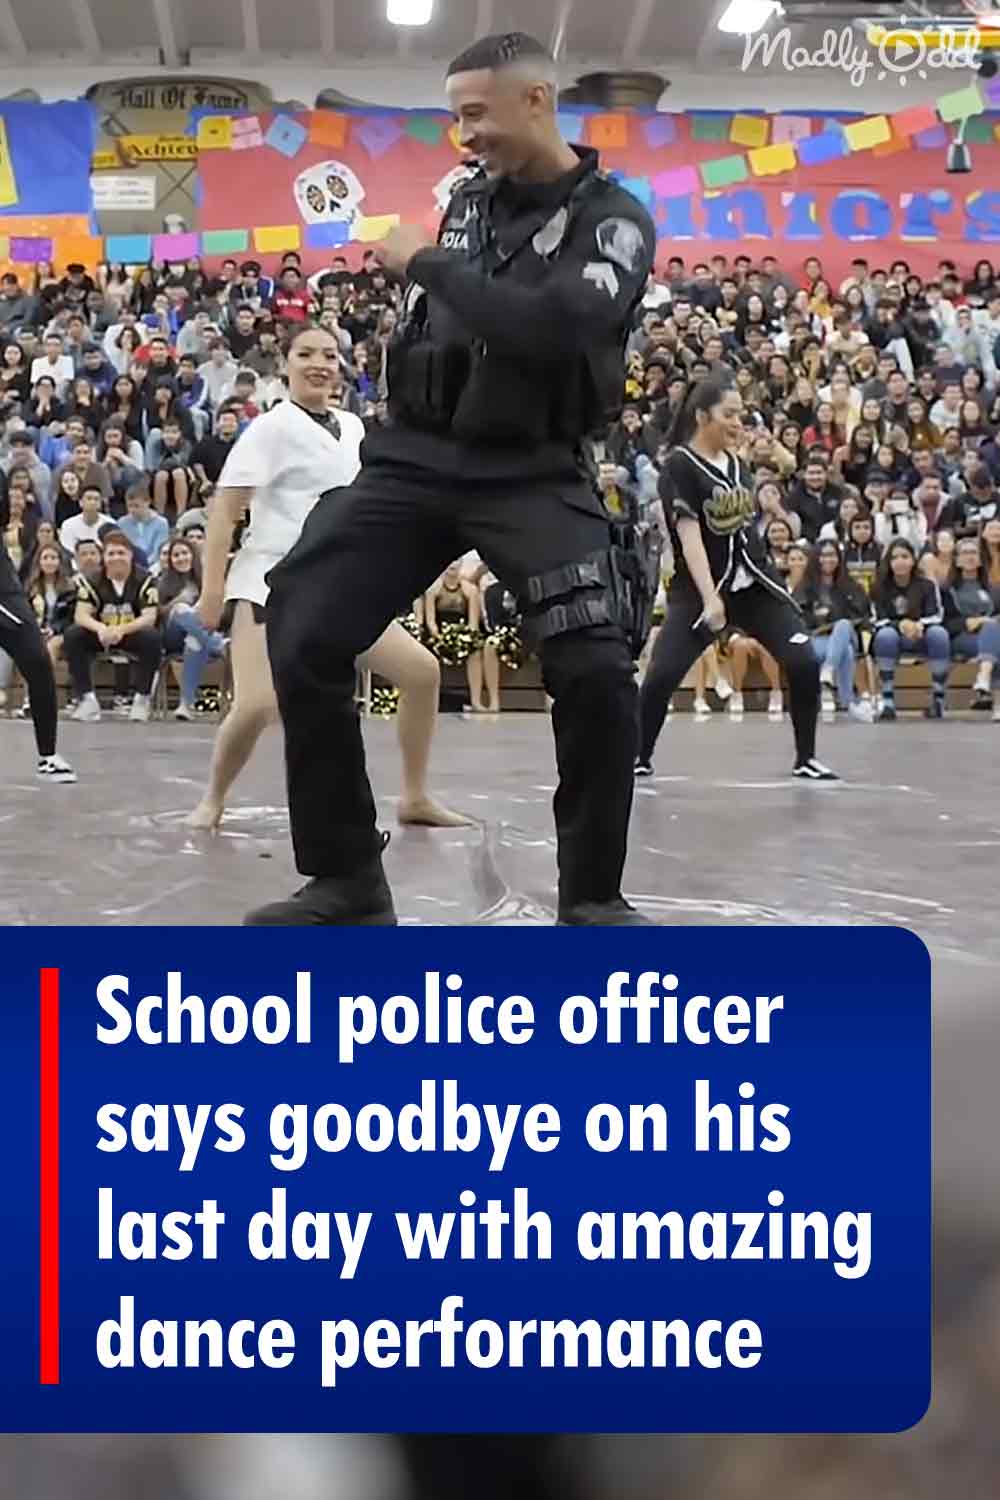 School police officer says goodbye on his last day with amazing dance performance